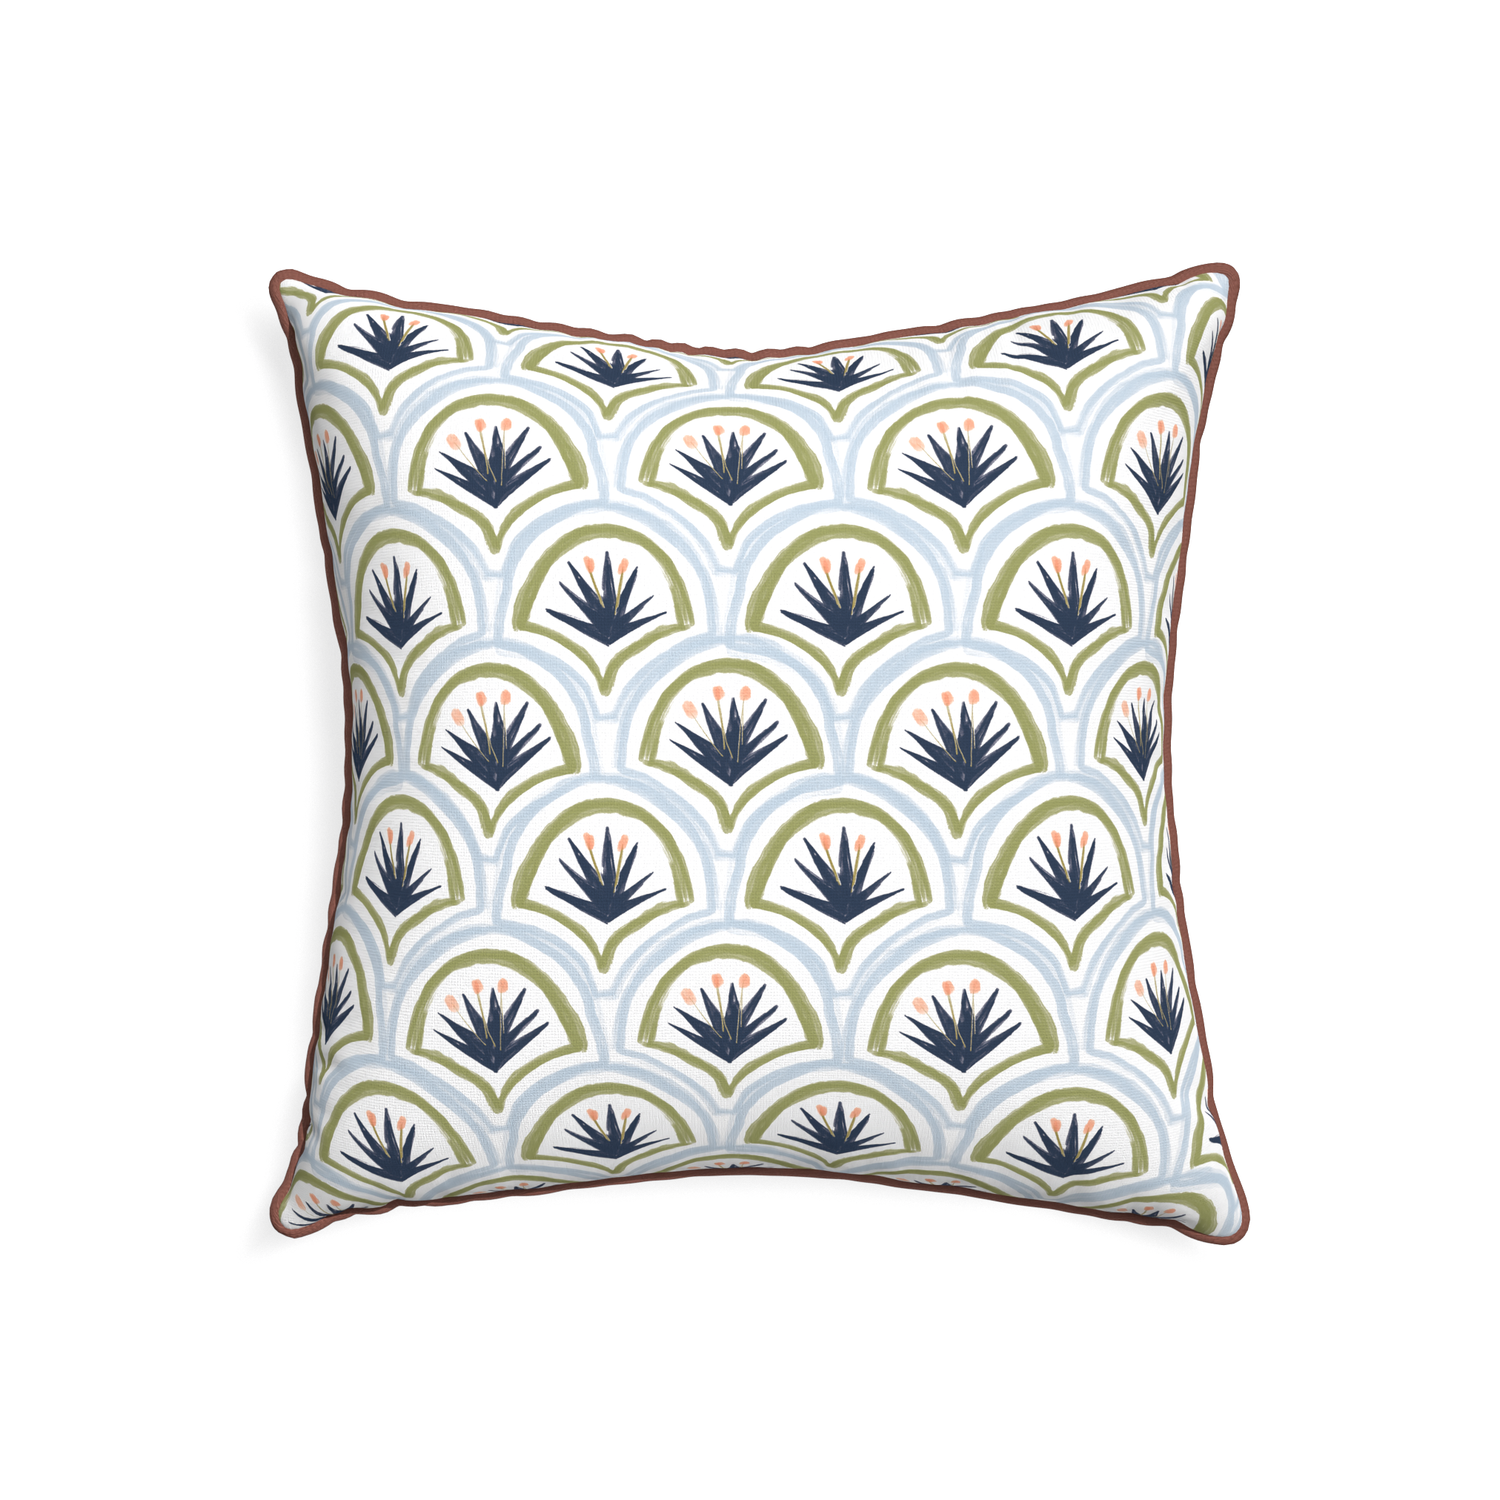 22-square thatcher midnight custom art deco palm patternpillow with w piping on white background